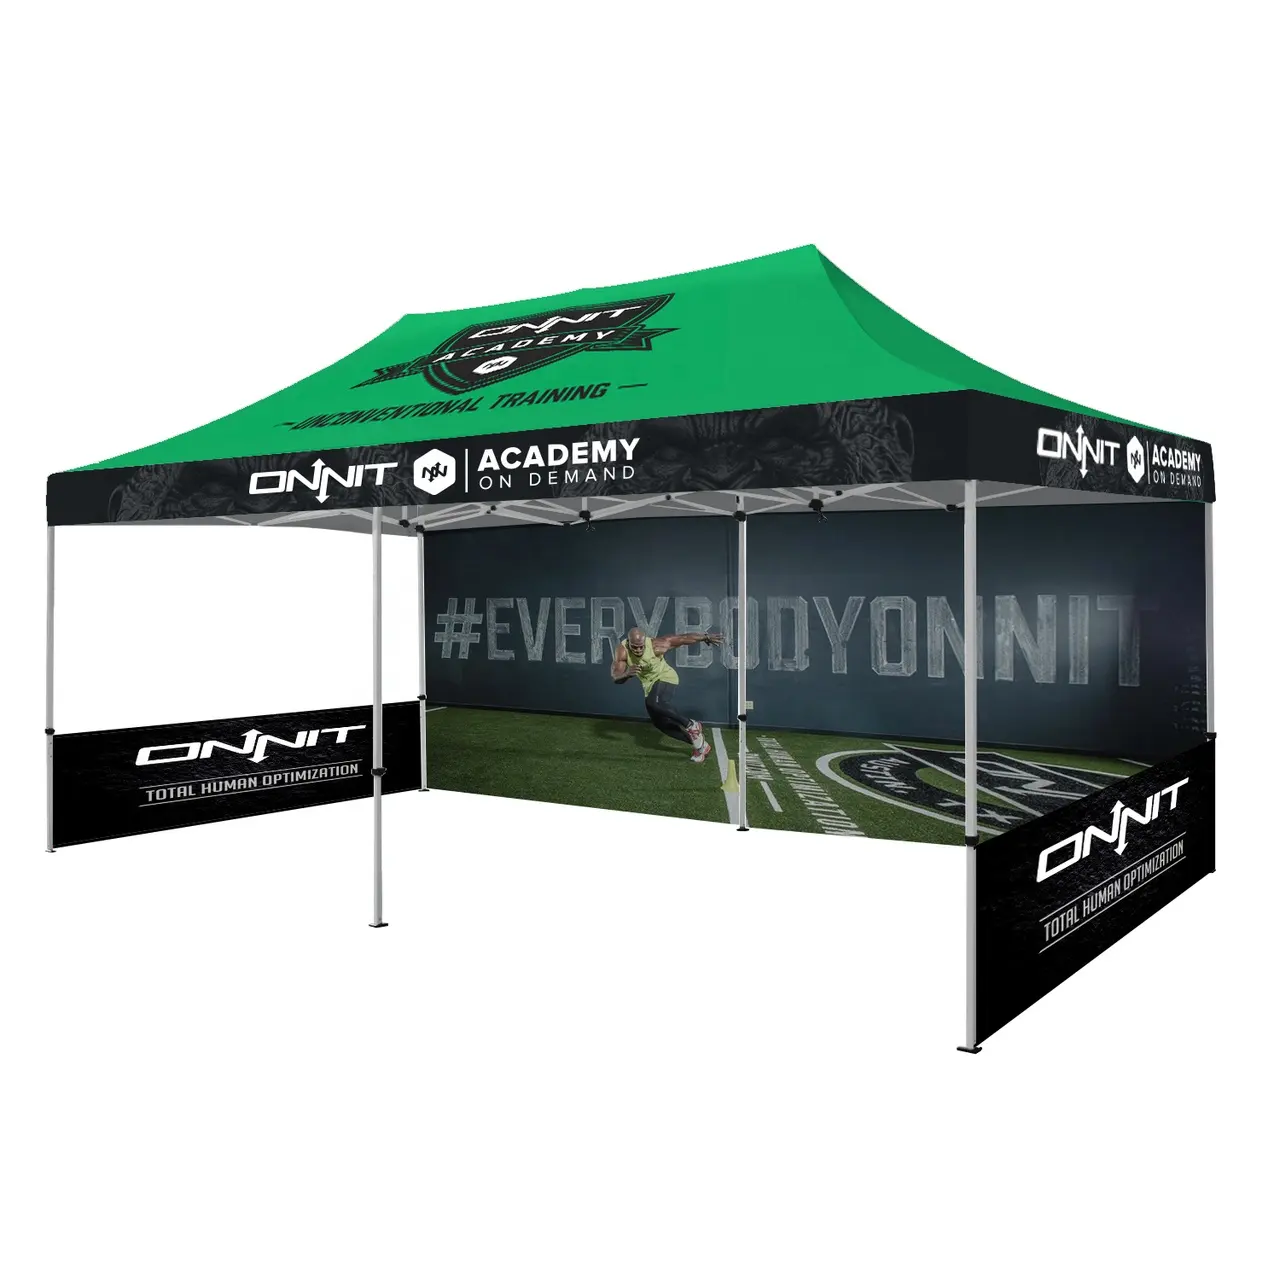 10x20 Custom Trade Show Tent Waterproof Printed Outdoor Folding Pop Up Canopy Tent